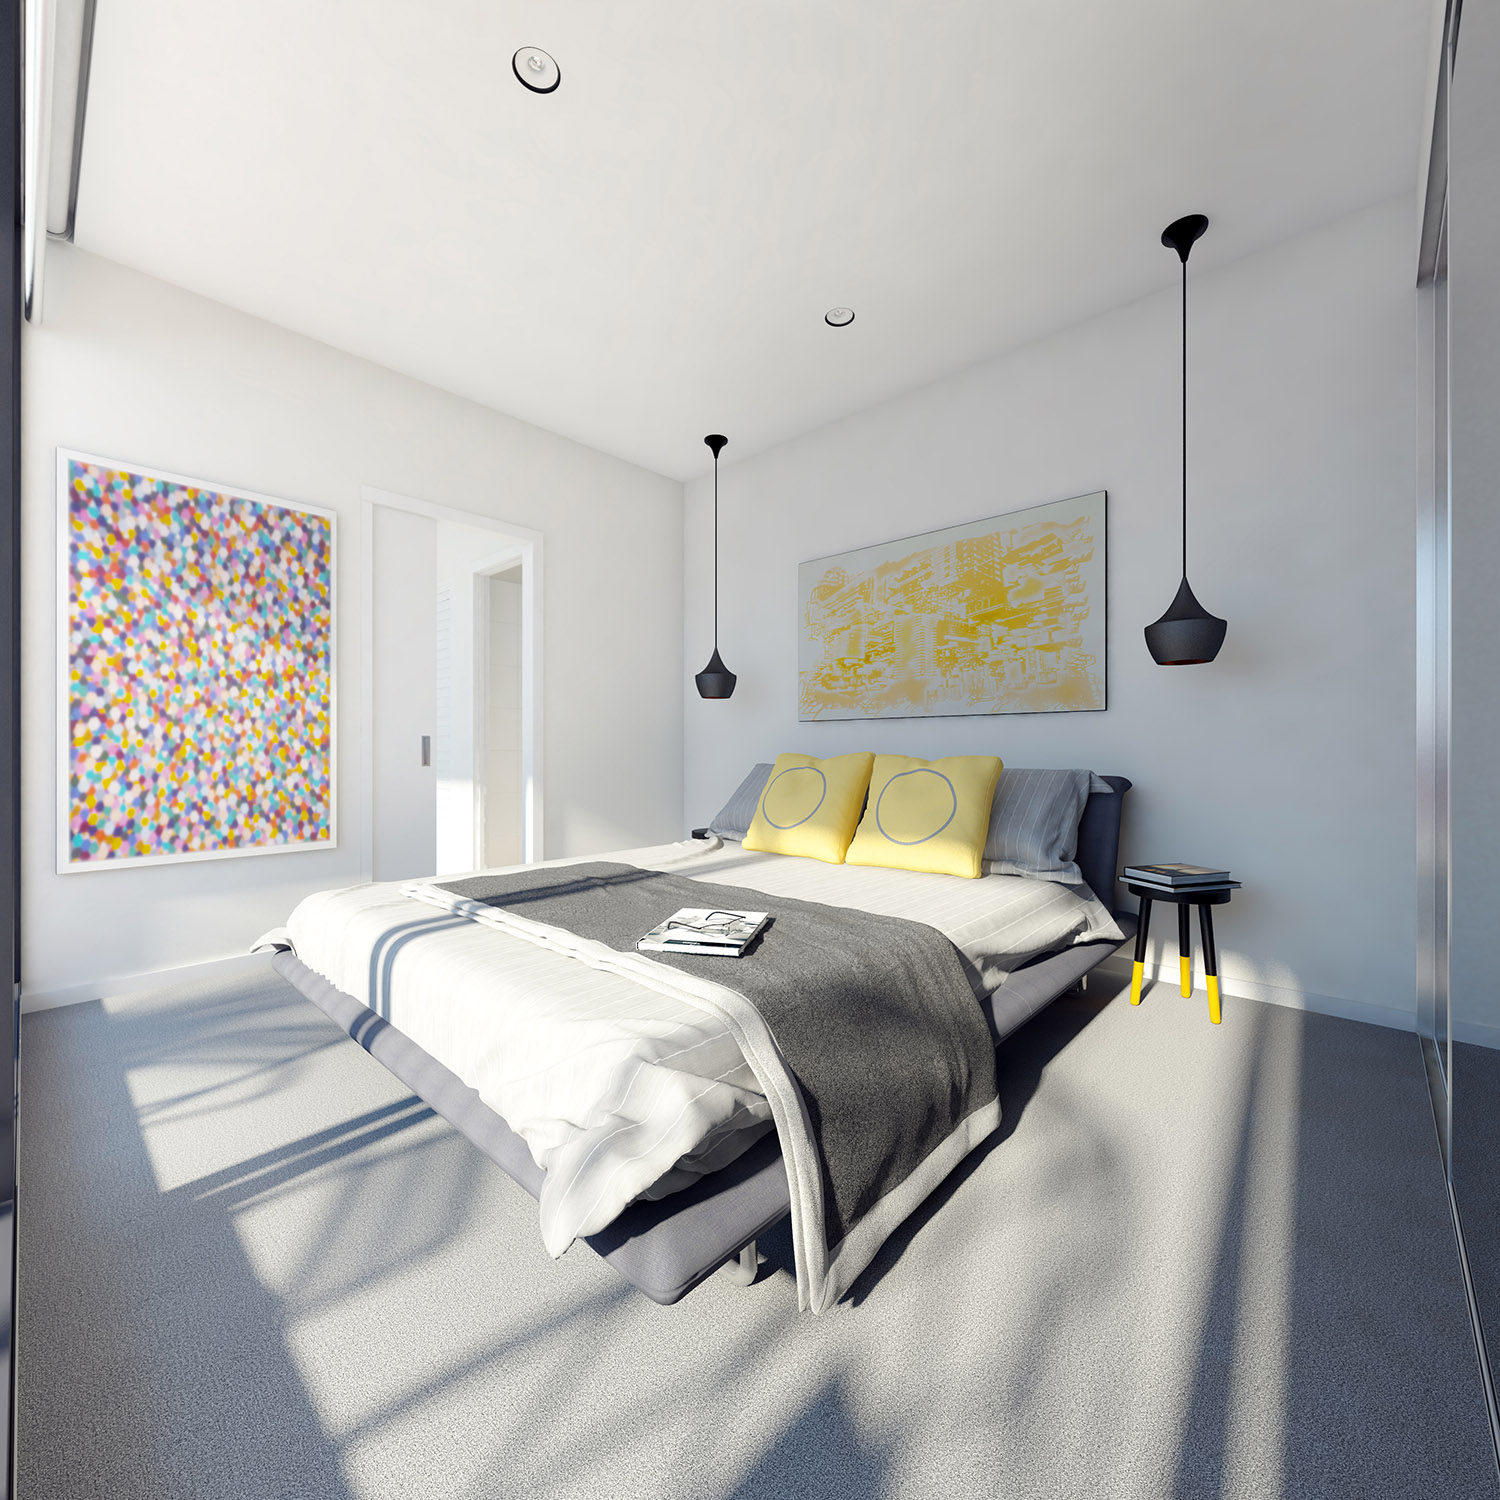 Modern bedroom color ideas "width =" 1500 "height =" 1500 "srcset =" https://mileray.com/wp-content/uploads/2020/05/1588511200_369_10-Modern-Master-Bedroom-Color-Ideas-Suitable-For-Your-Retreat.jpeg 1500w, https://mileray.com / wp-content / uploads / 2016/05 / Atomic3D-1-150x150.jpeg 150w, https://mileray.com/wp-content/uploads/2016/05/Atomic3D-1-300x300.jpeg 300w, https: / / mileray.com/wp-content/uploads/2016/05/Atomic3D-1-768x768.jpeg 768w, https://mileray.com/wp-content/uploads/2016/05/Atomic3D-1-1024x1024.jpeg 1024w, https://mileray.com/wp-content/uploads/2016/05/Atomic3D-1-696x696.jpeg 696w, https://mileray.com/wp-content/uploads/2016/05/Atomic3D-1- 1068x1068 .jpeg 1068w, https://mileray.com/wp-content/uploads/2016/05/Atomic3D-1-420x420.jpeg 420w "sizes =" (maximum width: 1500px) 100vw, 1500px